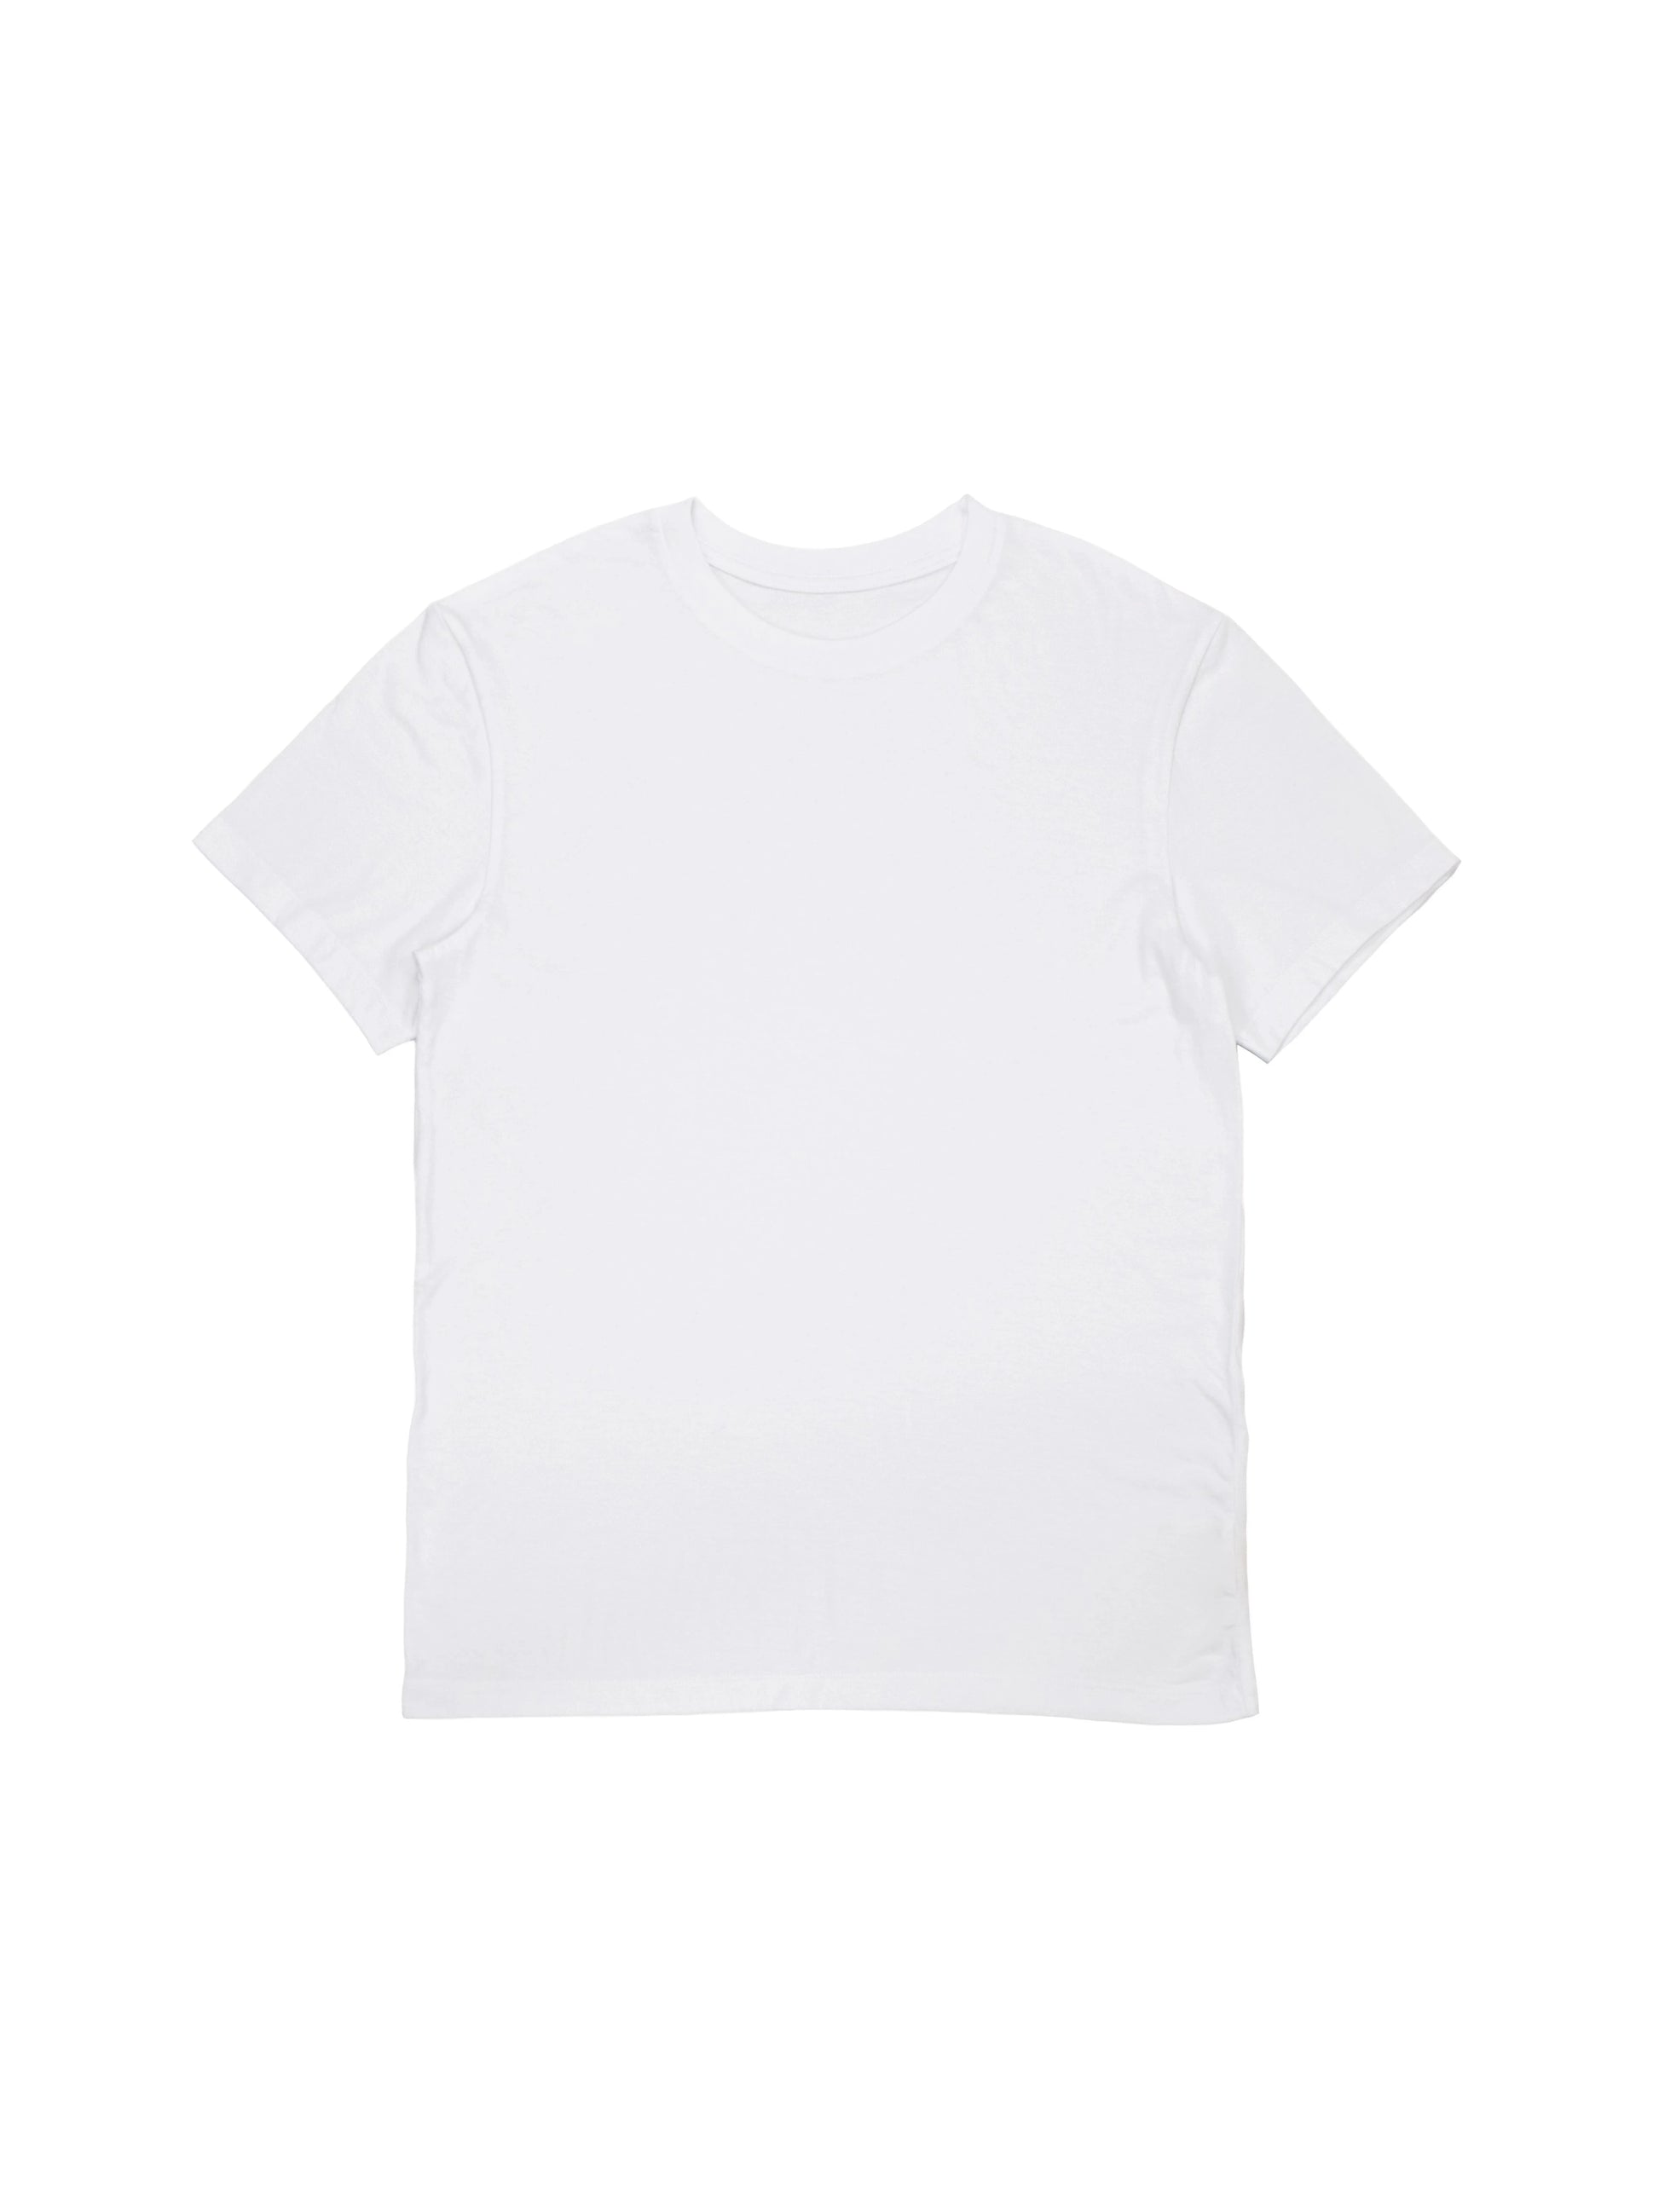 White T-Shirt in Trendy Boxy Fit.